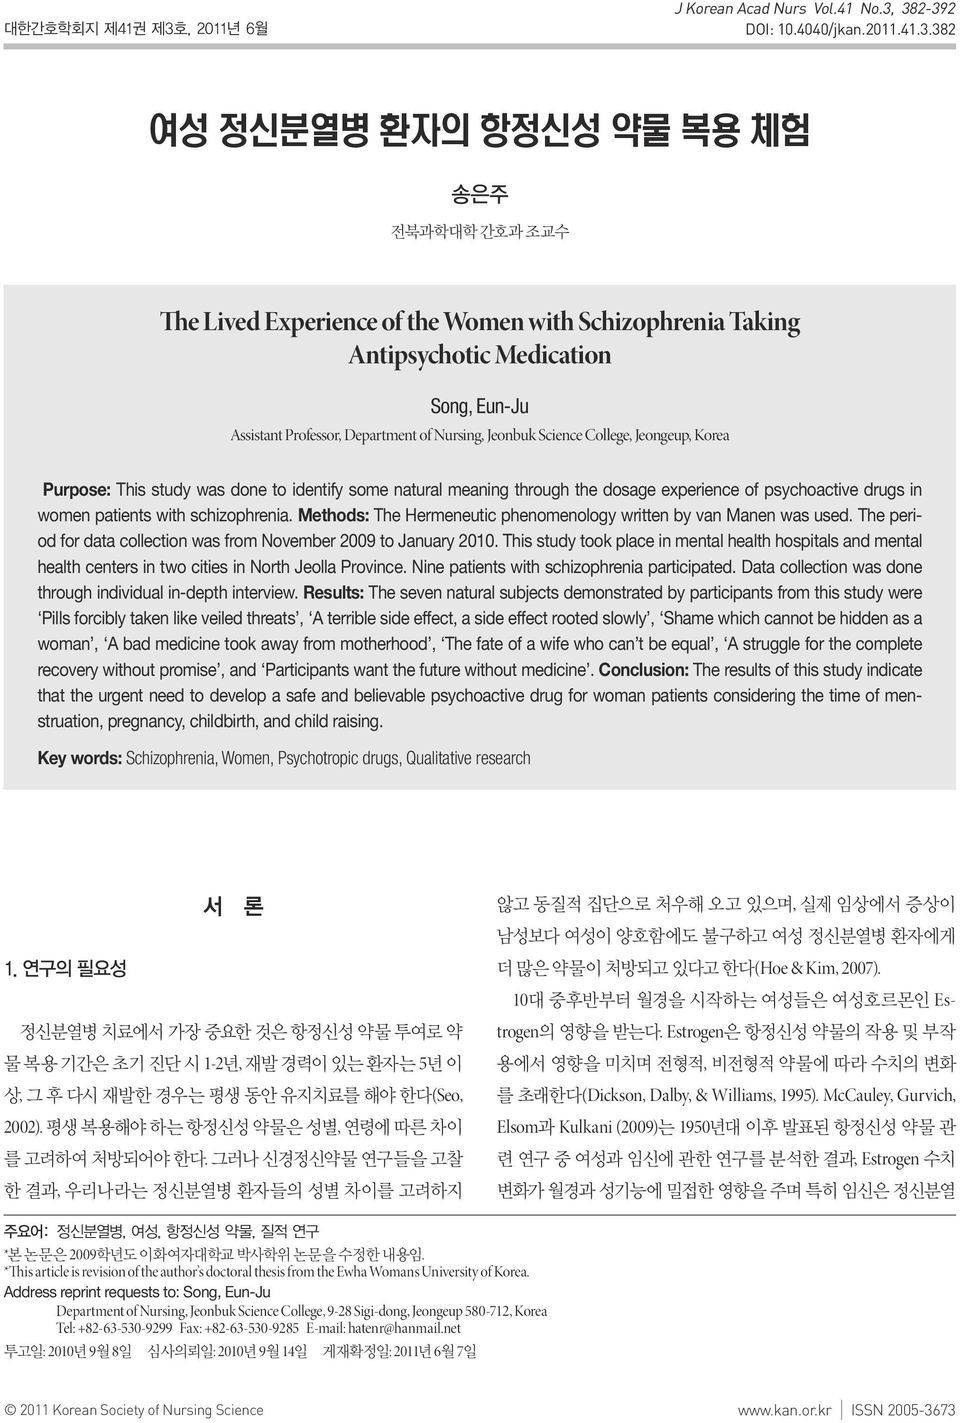 Jeonbuk Science College, Jeongeup, Korea Purpose: This study was done to identify some natural meaning through the dosage experience of psychoactive drugs in women patients with schizophrenia.